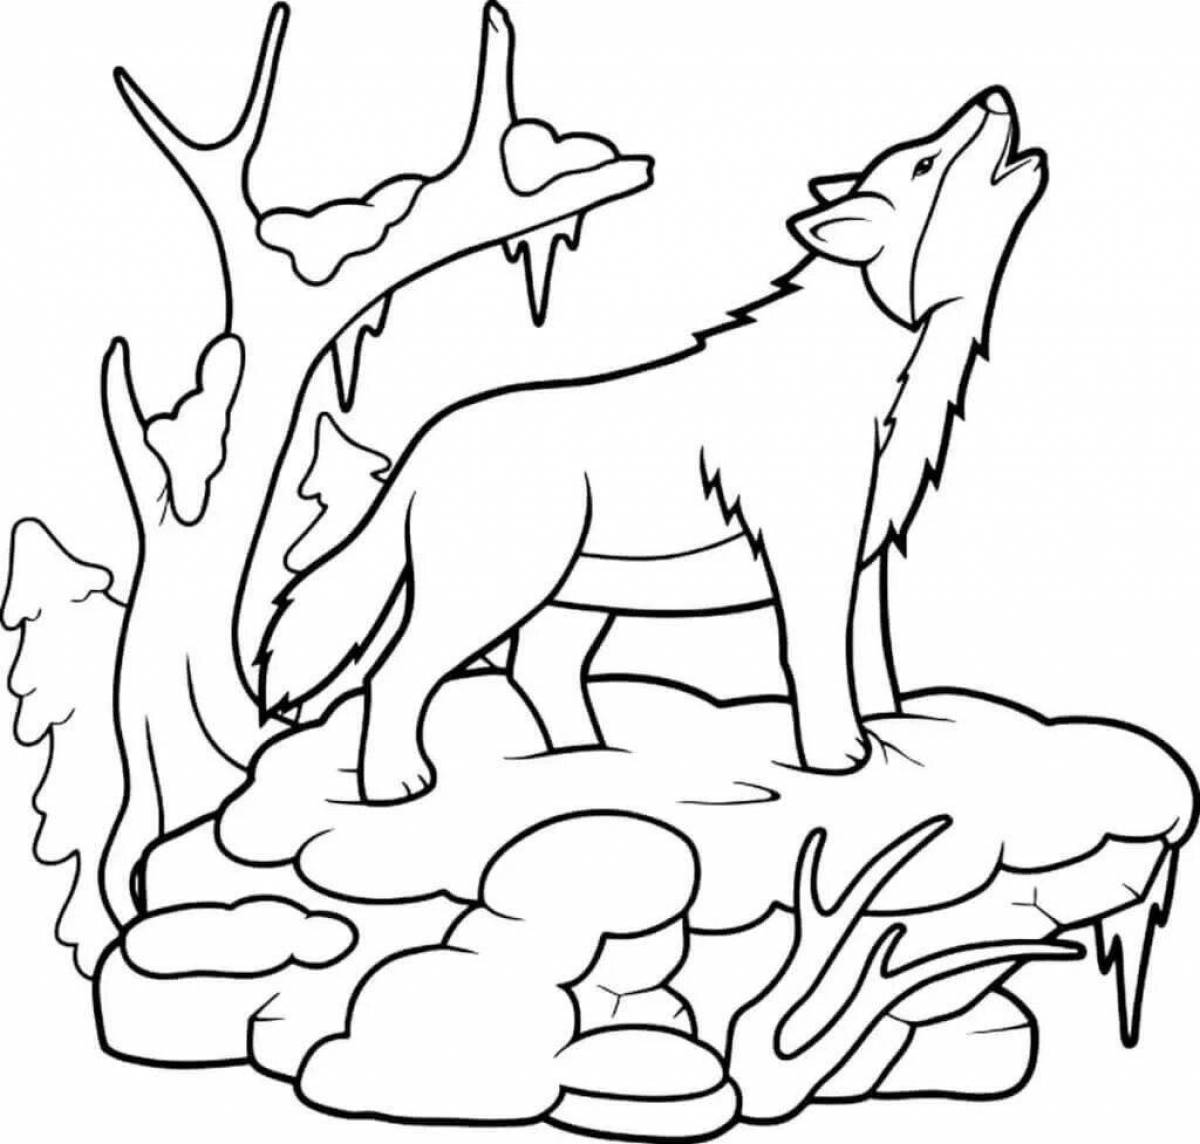 Coloring page majestic winter forest with animals